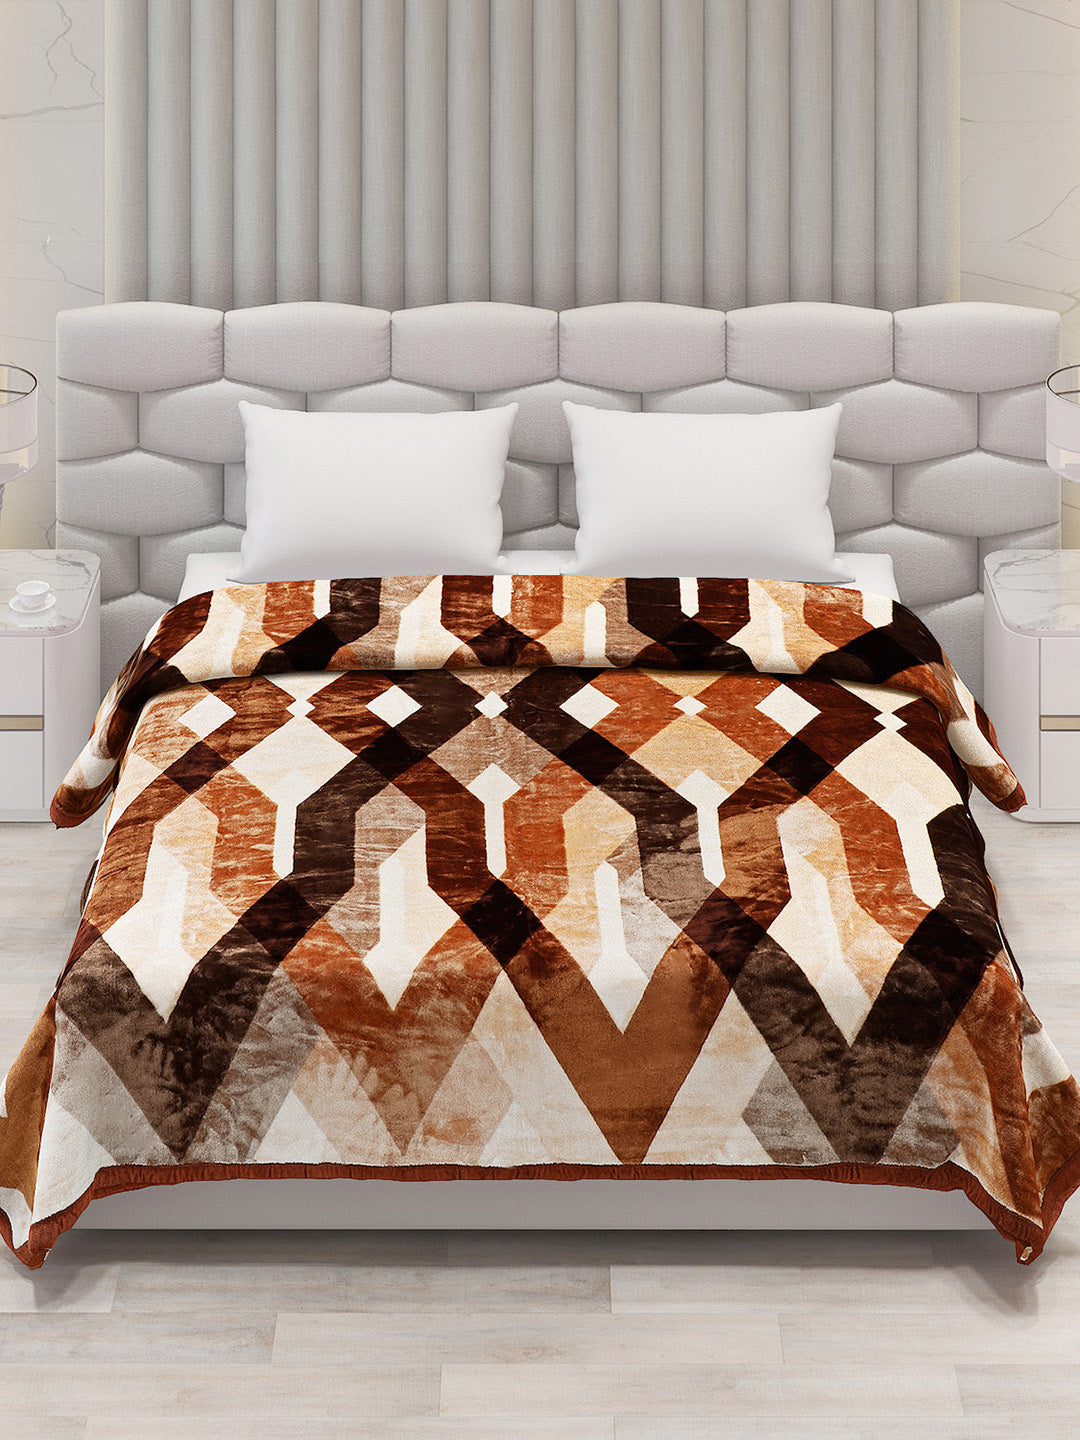 Printed Double Bed Blanket for Mild Winter -1 Ply